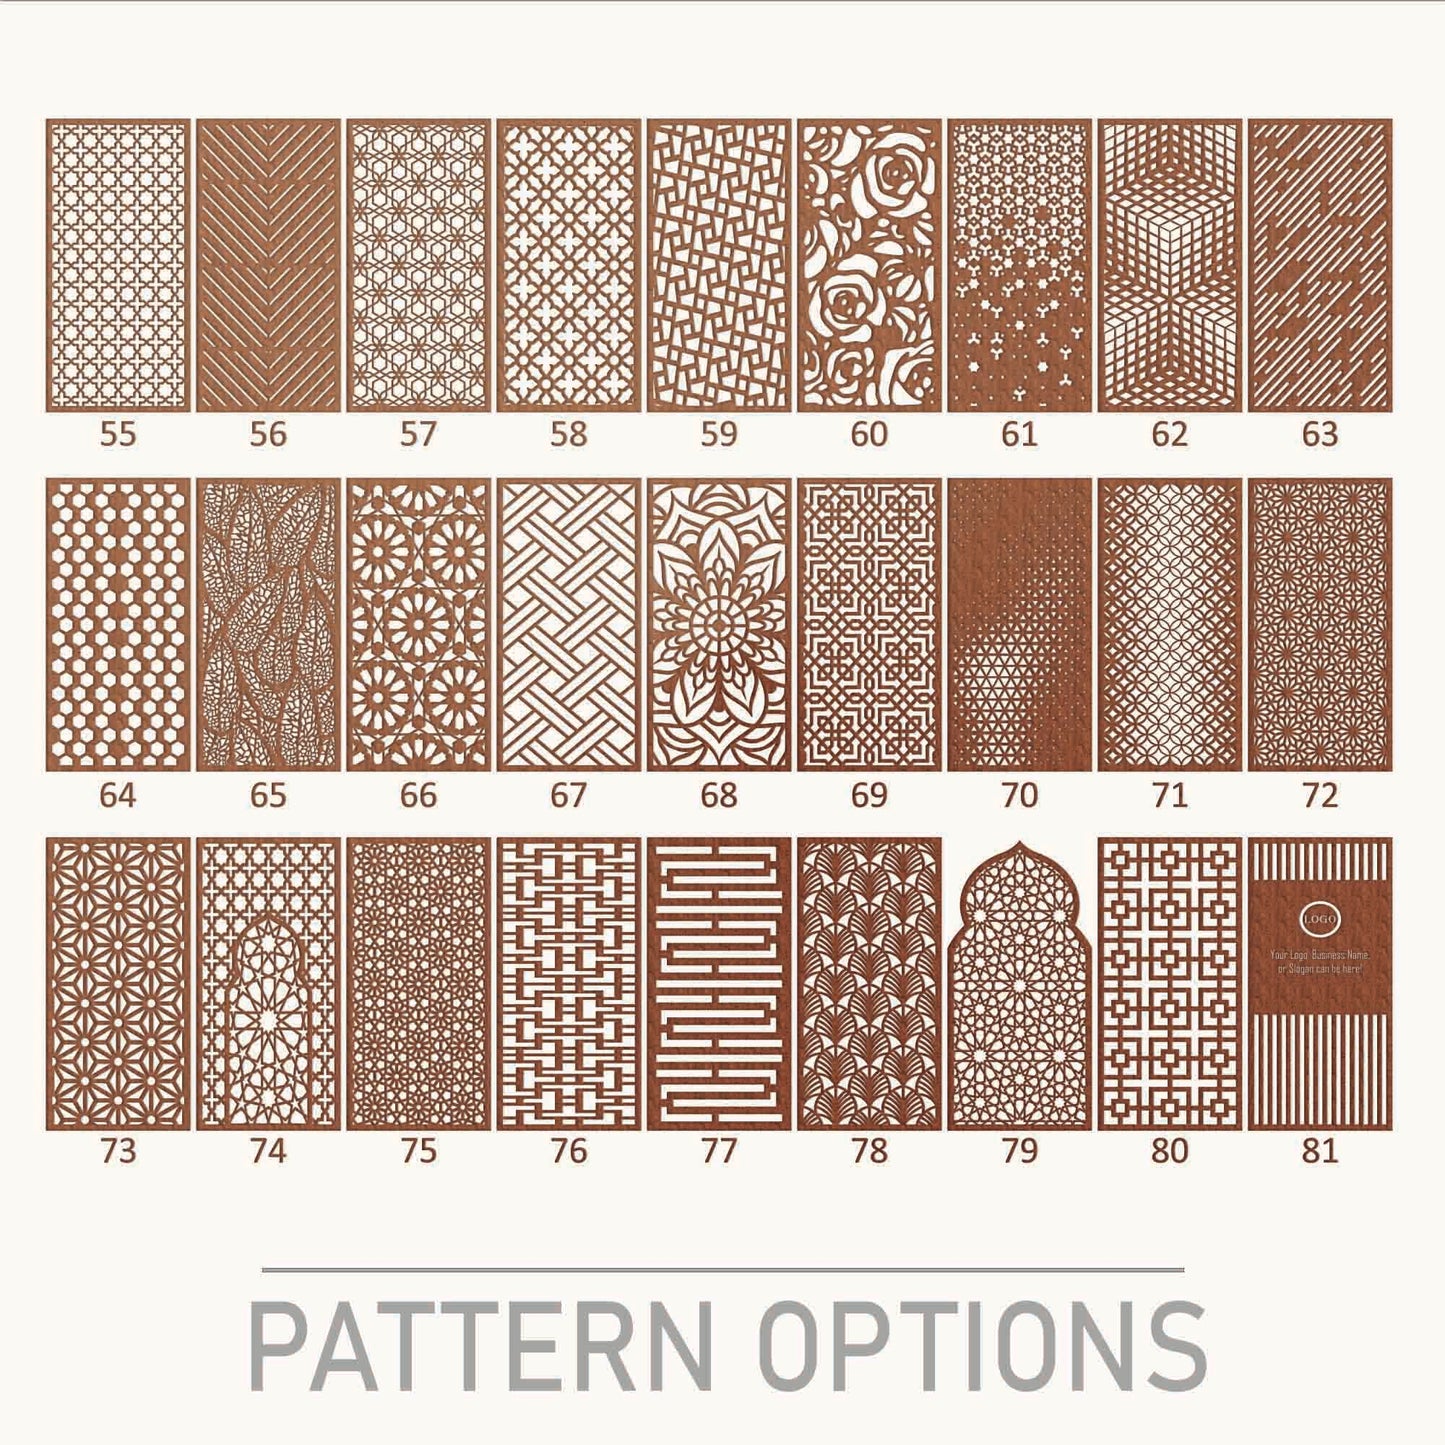 Room dividers, Partition Panel room divider , Room Divider, Custom Divider Screen, Panels CraftivaArt, Ikea room divider, room design, interior design, wall art, wall design, home decoration, wall panel, wall partition, wall divider